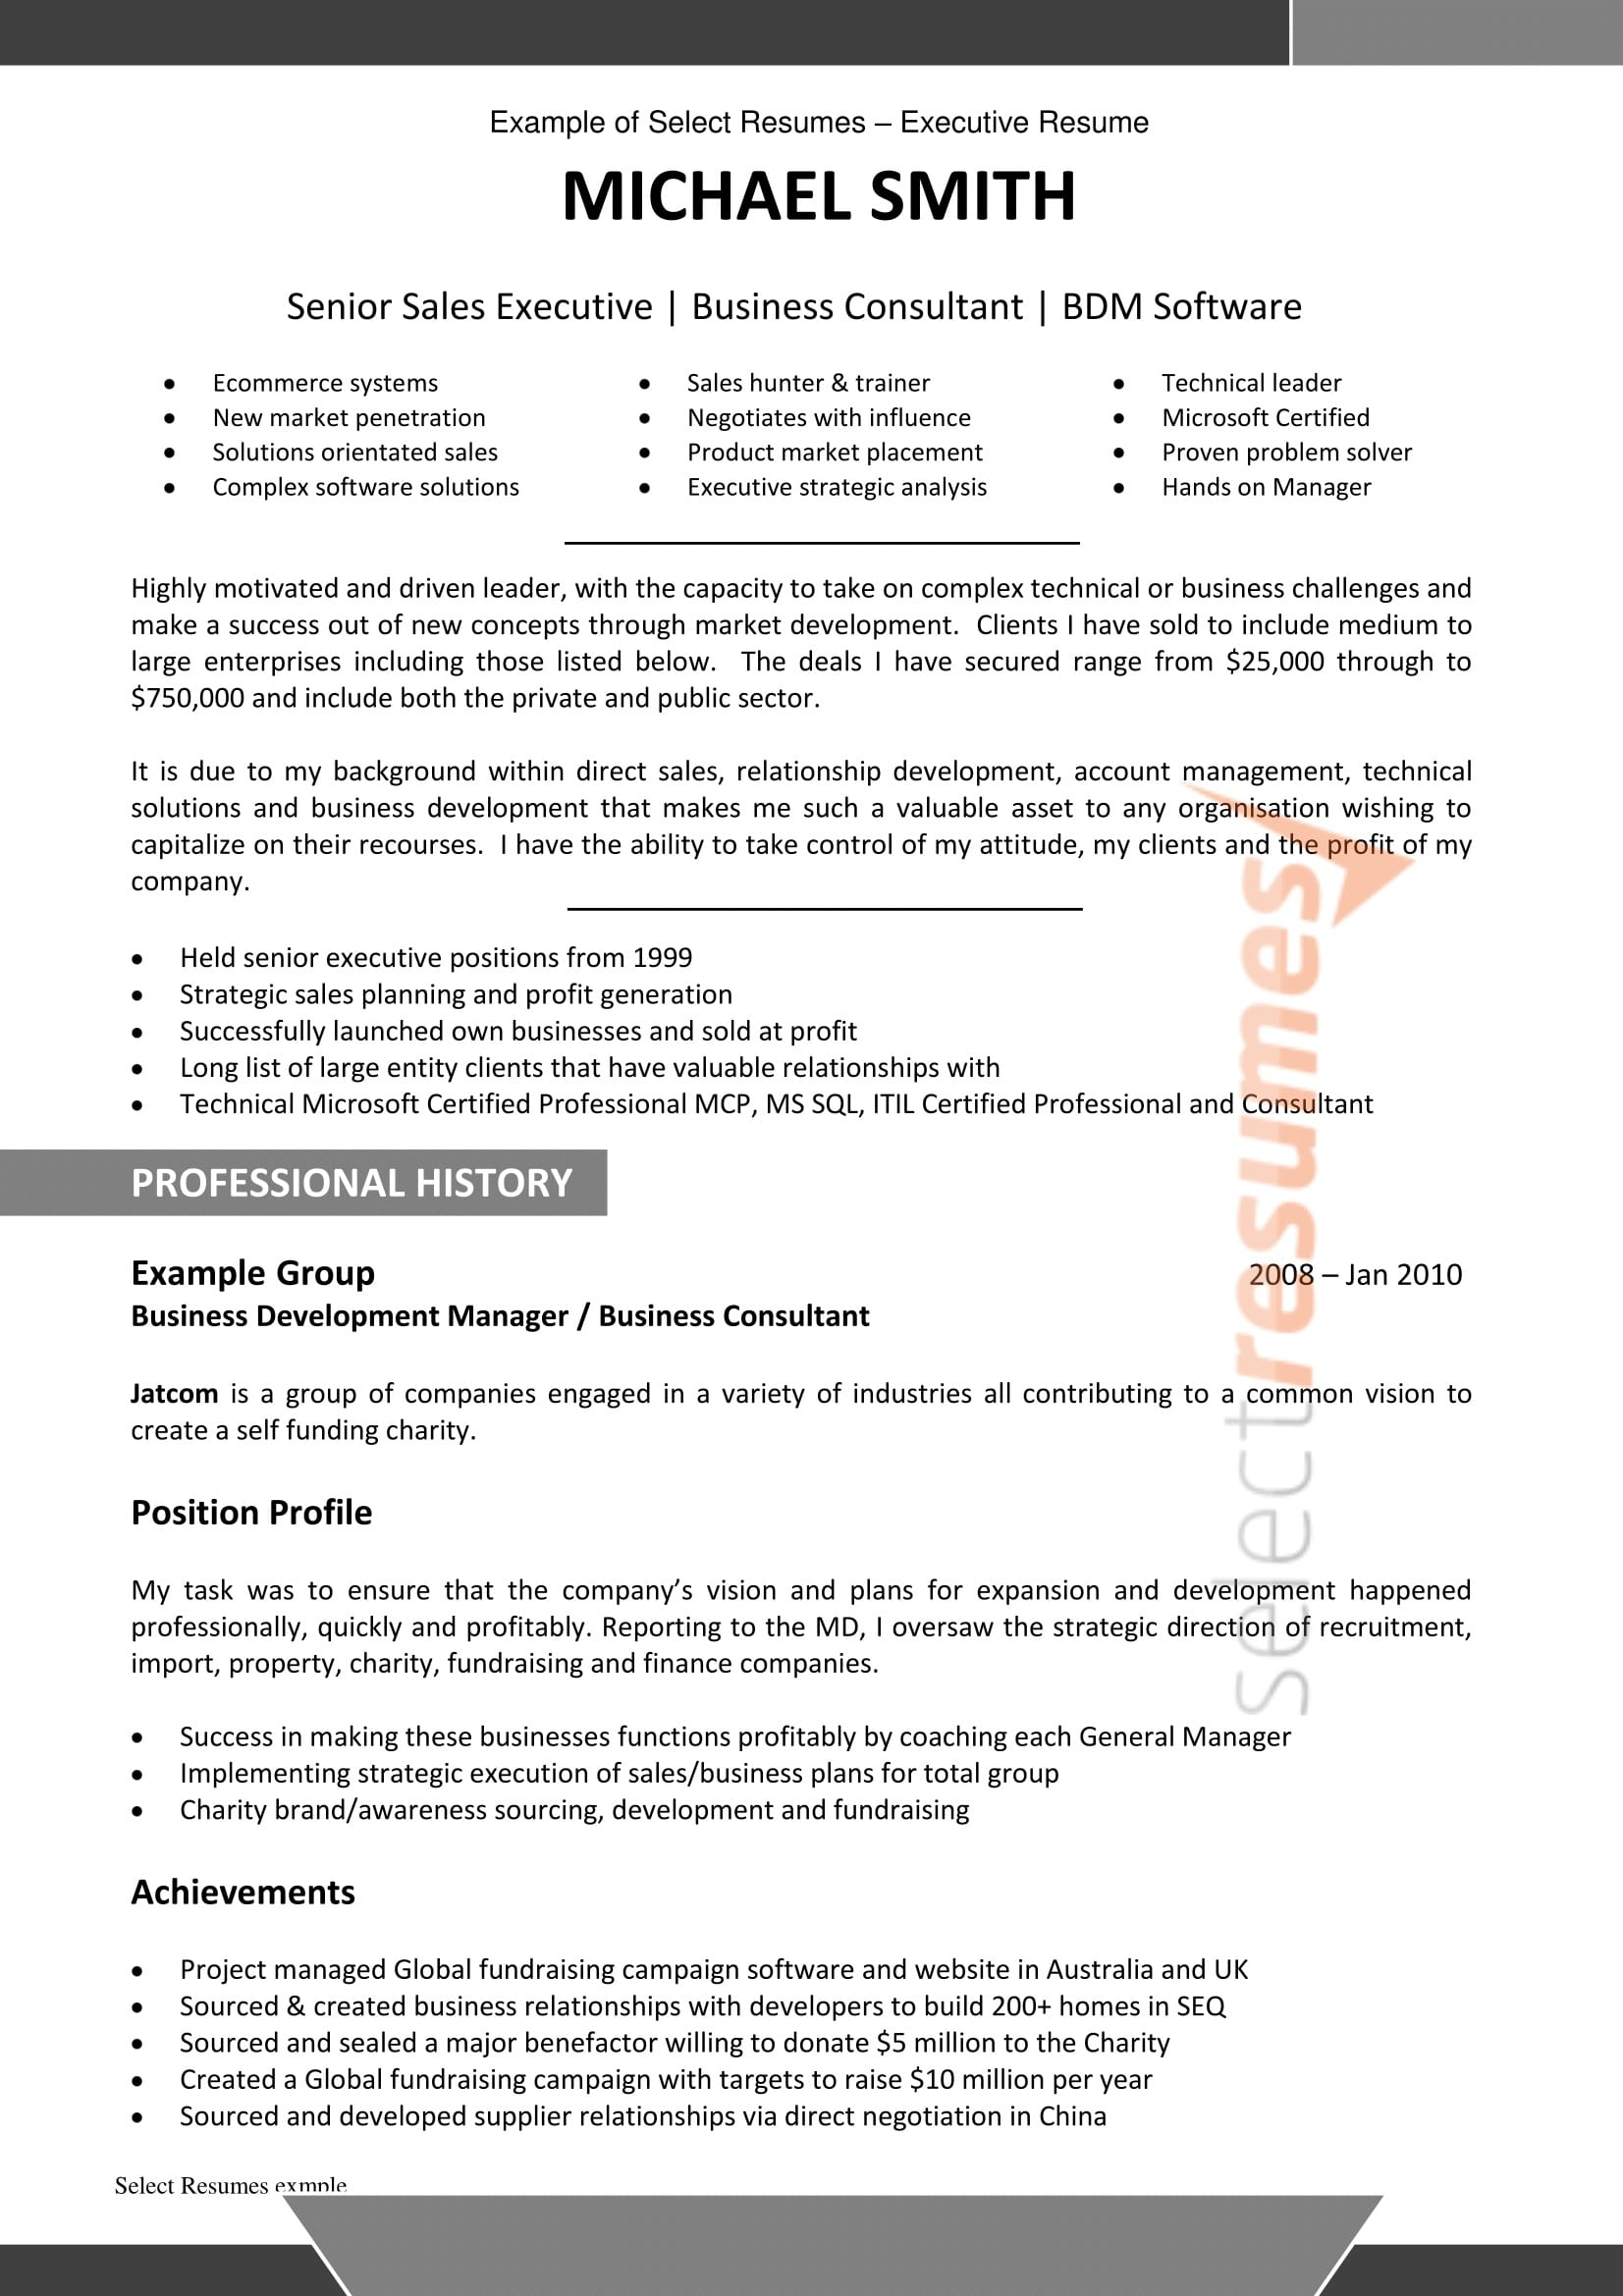 Public Sector Resume Writing Service Select Resumes throughout dimensions 1653 X 2339